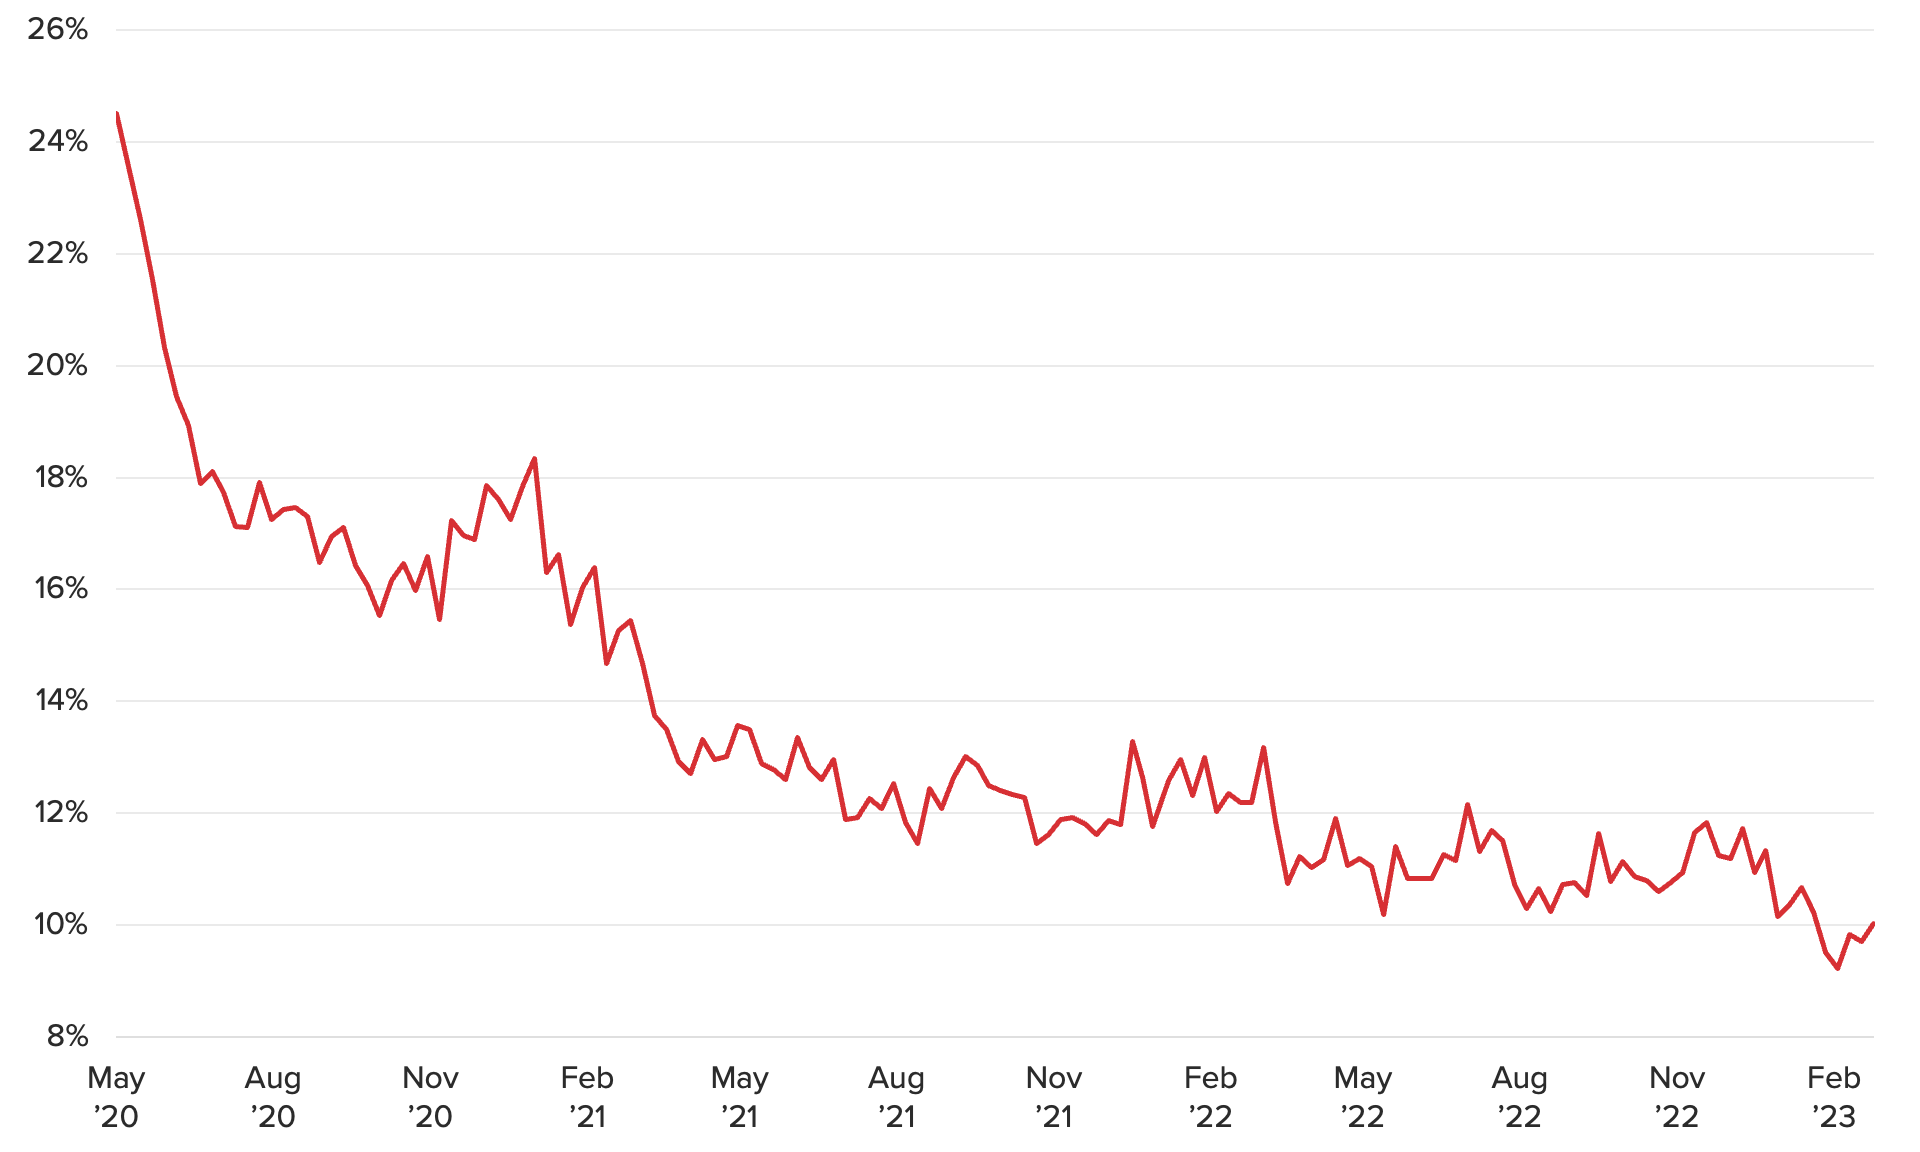 Line chart of the share of U.S. adults who reported losing pay or income in the past week, showing the series dropped to a new low in February.